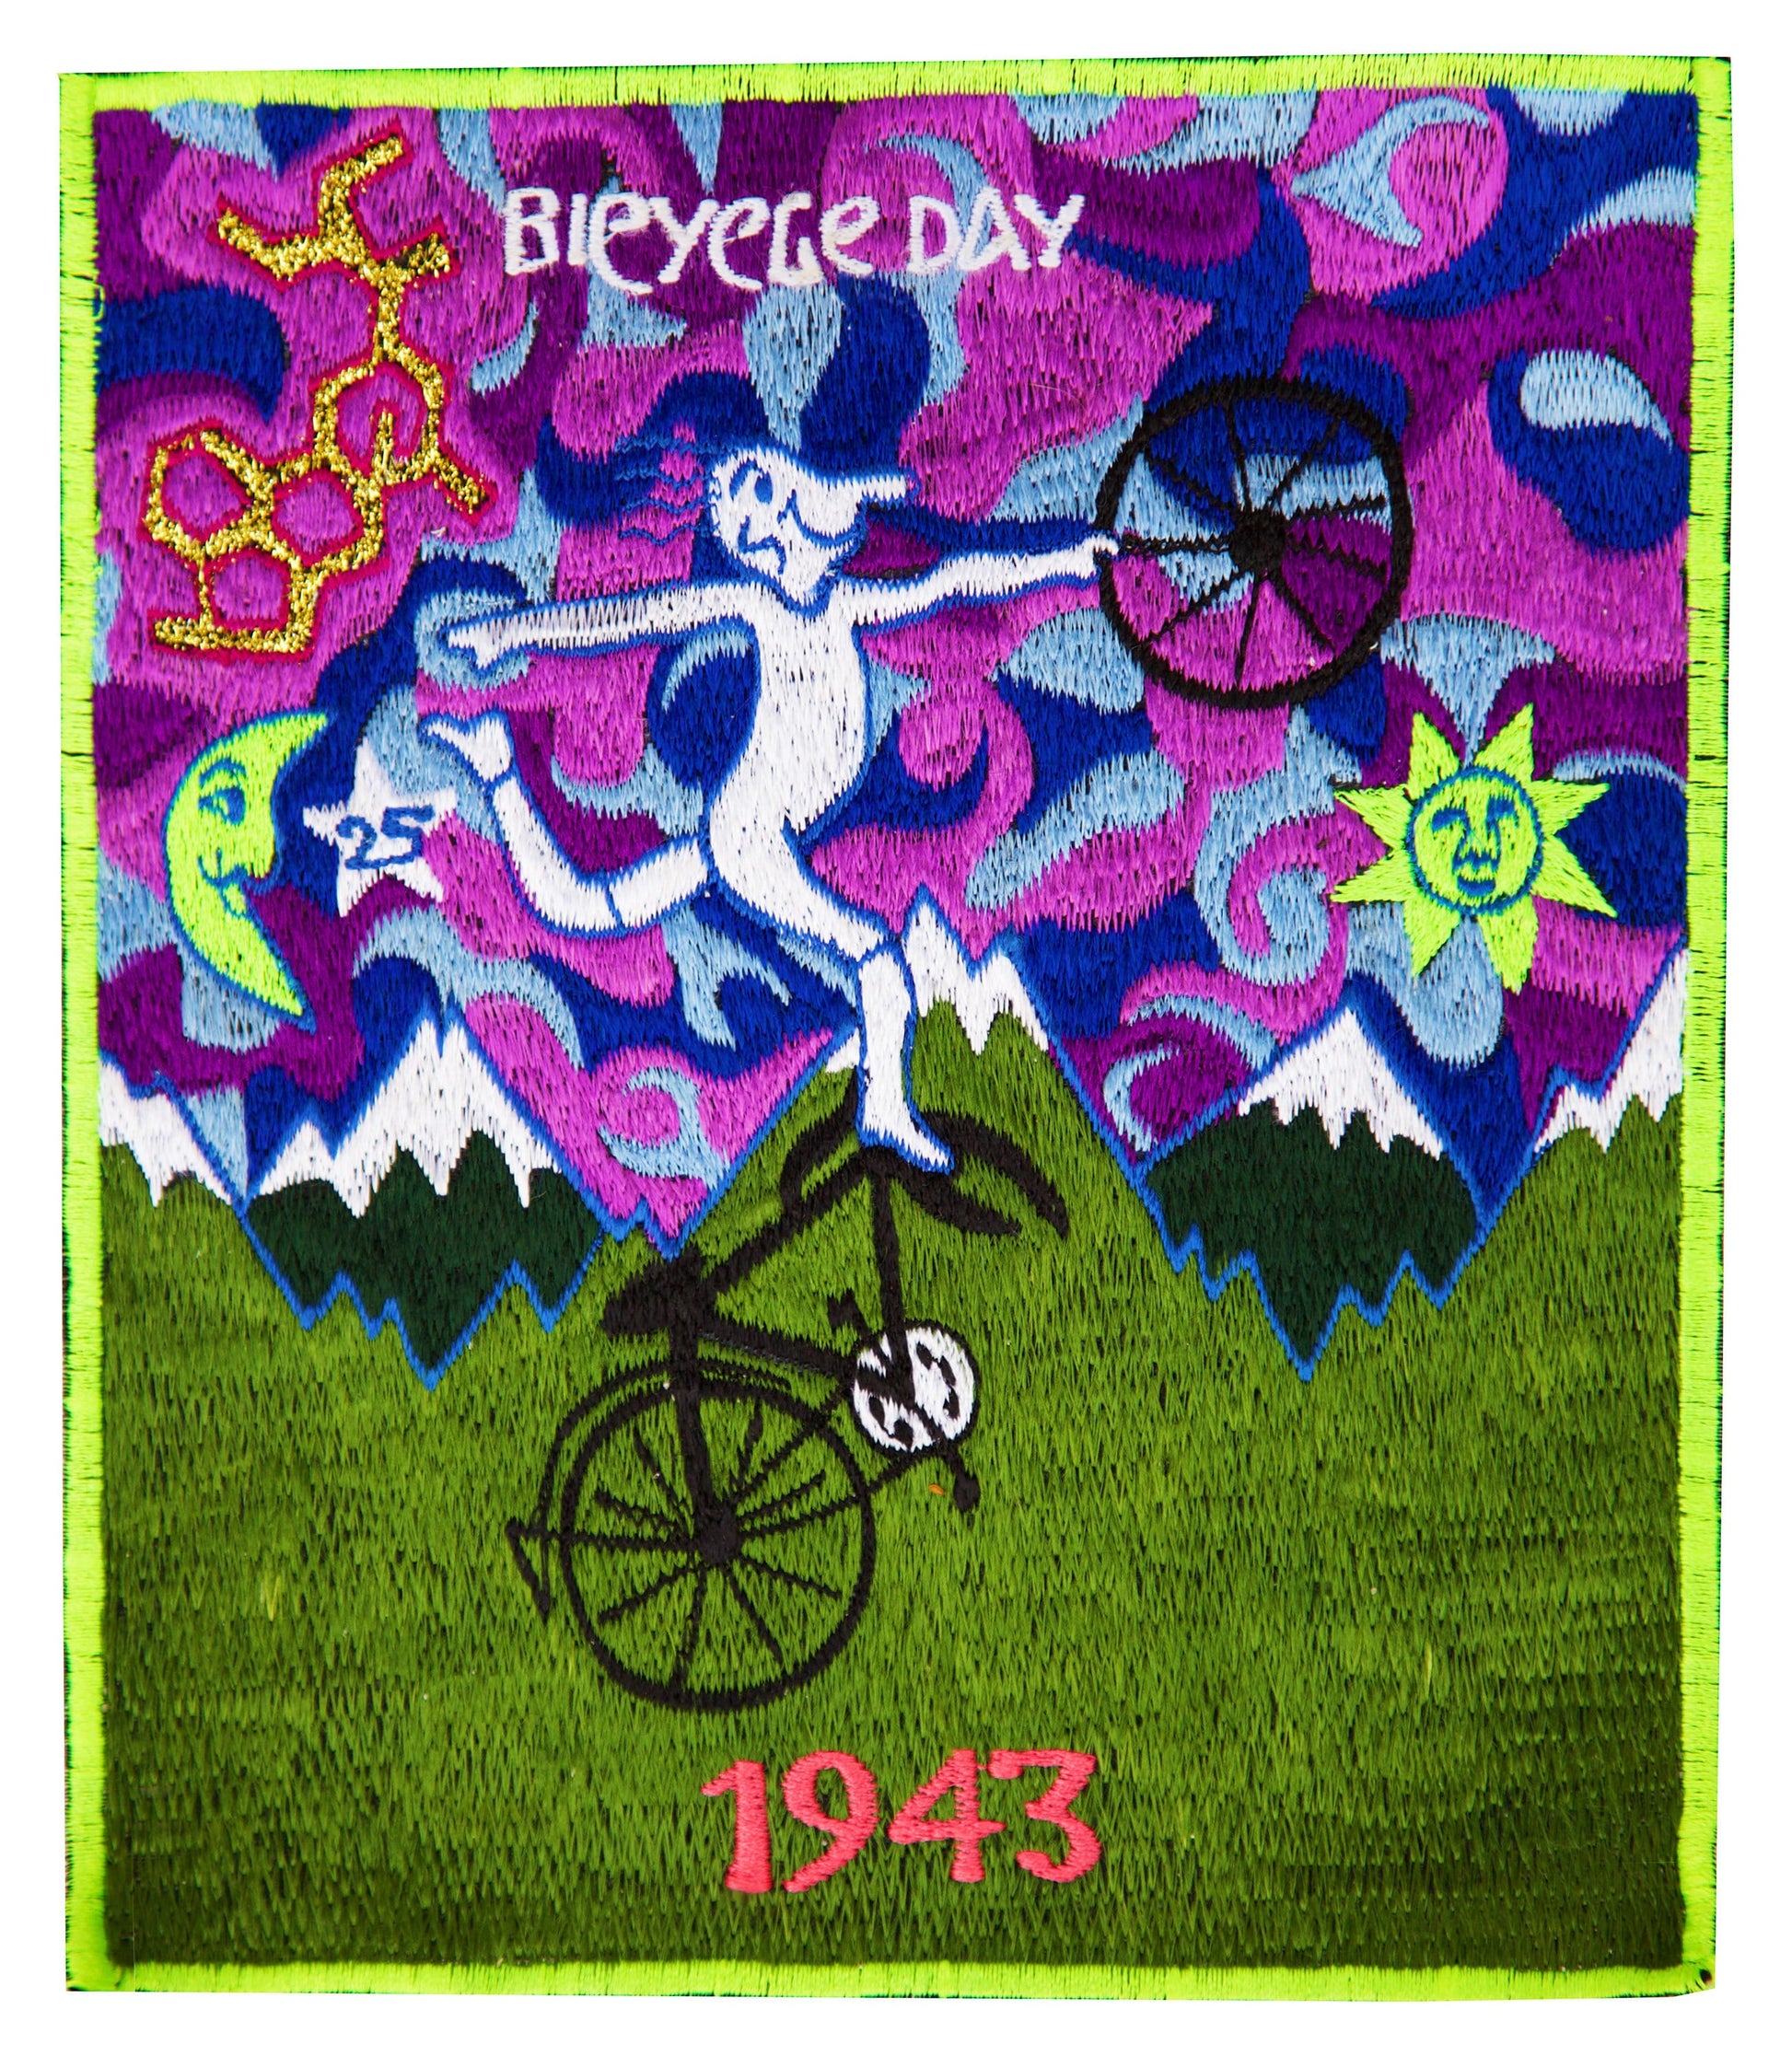 Pink Bicycleday Patch Psychedelic Albert Hofmann embroidery discovery of LSD vintage artwork Timothy Leary acid blotter art Bicycle Day